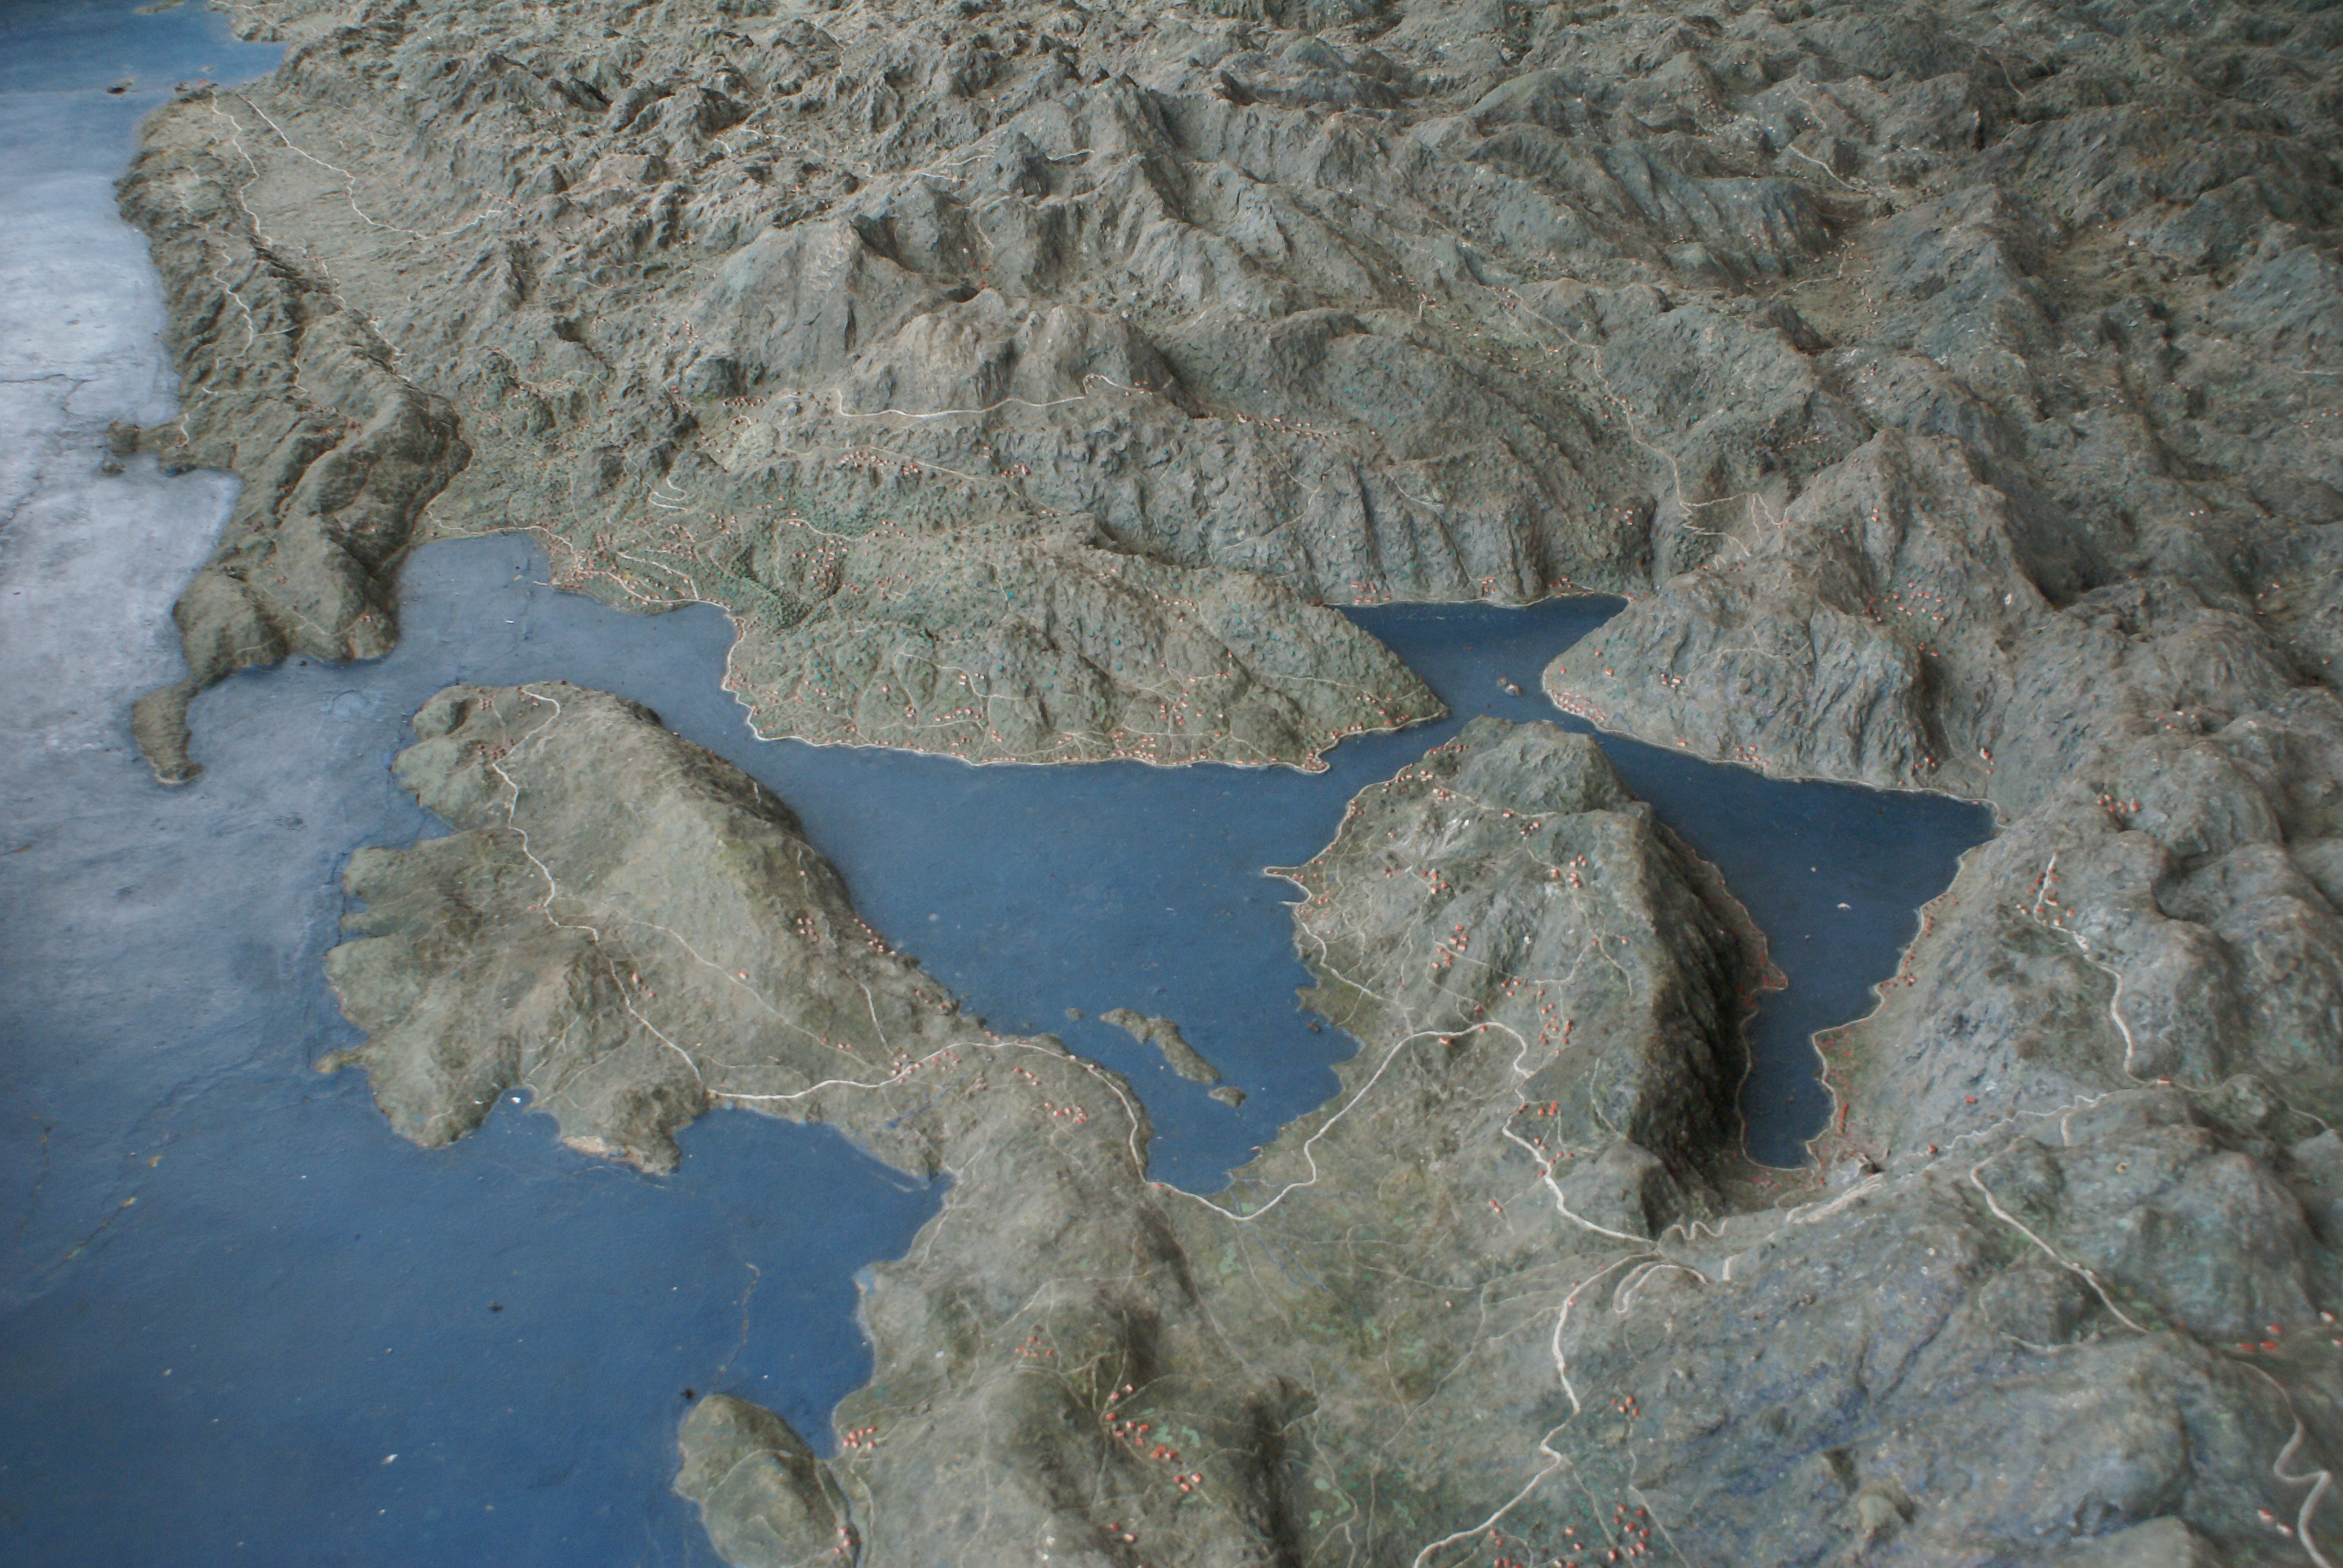 The Bay of Kotor on the relief map of Montenegro, Cetinje, Republic of Montenegro